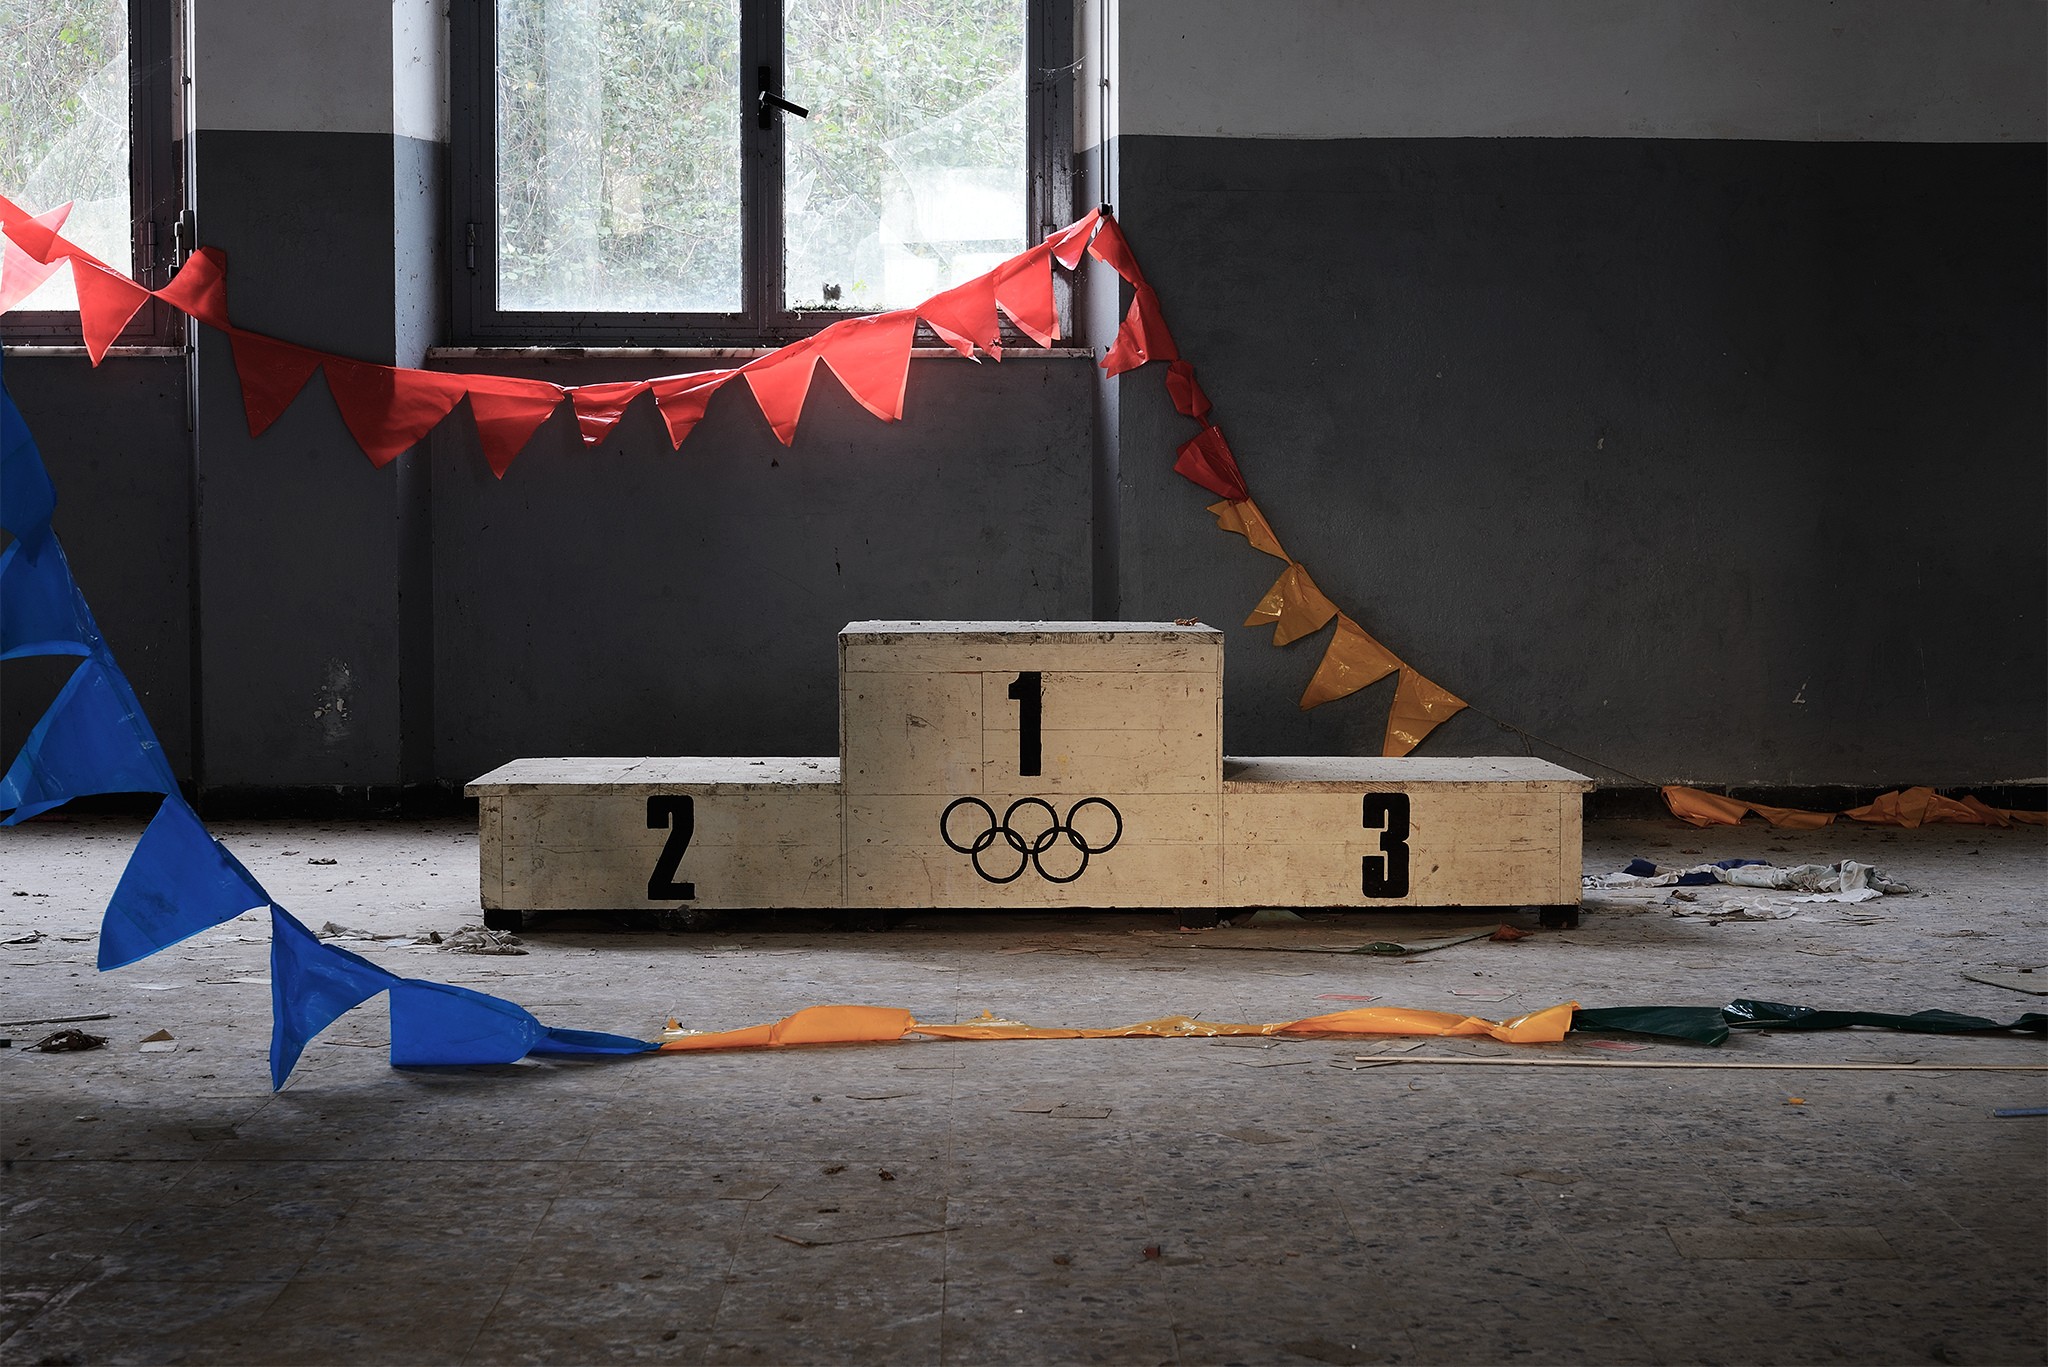 General 2048x1367 abandoned interior podiums Olympics flag window wall stages on the floor numbers